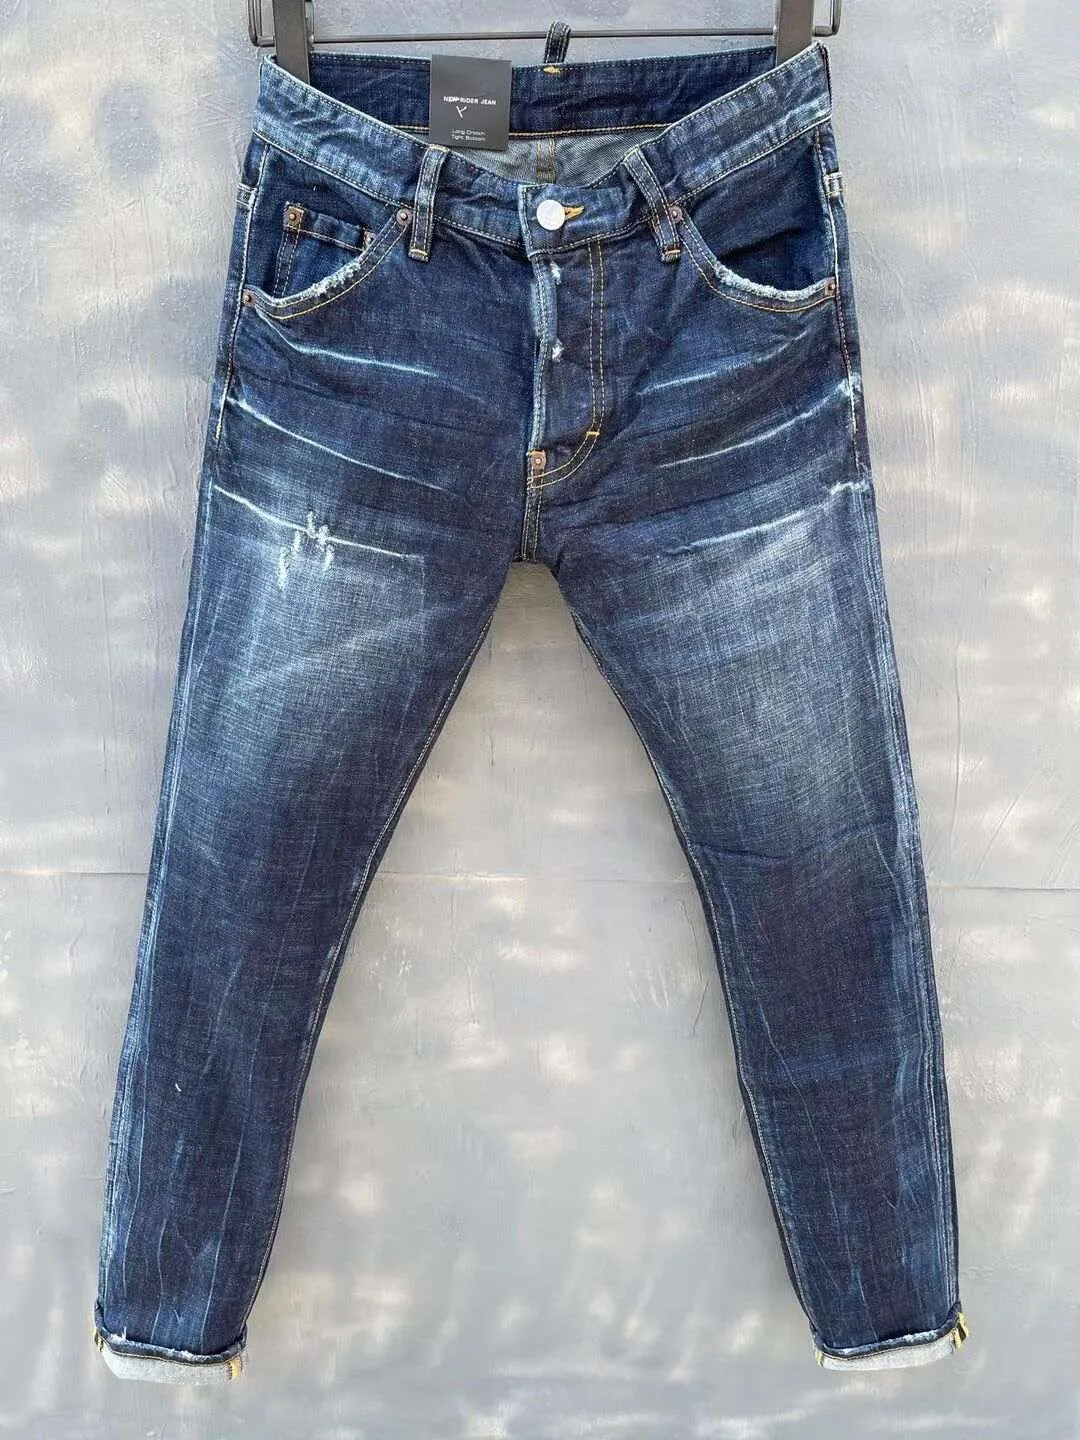 Italian fashion European and American men's casual jeans, high-end washed, hand polished, quality optimized LA021-1